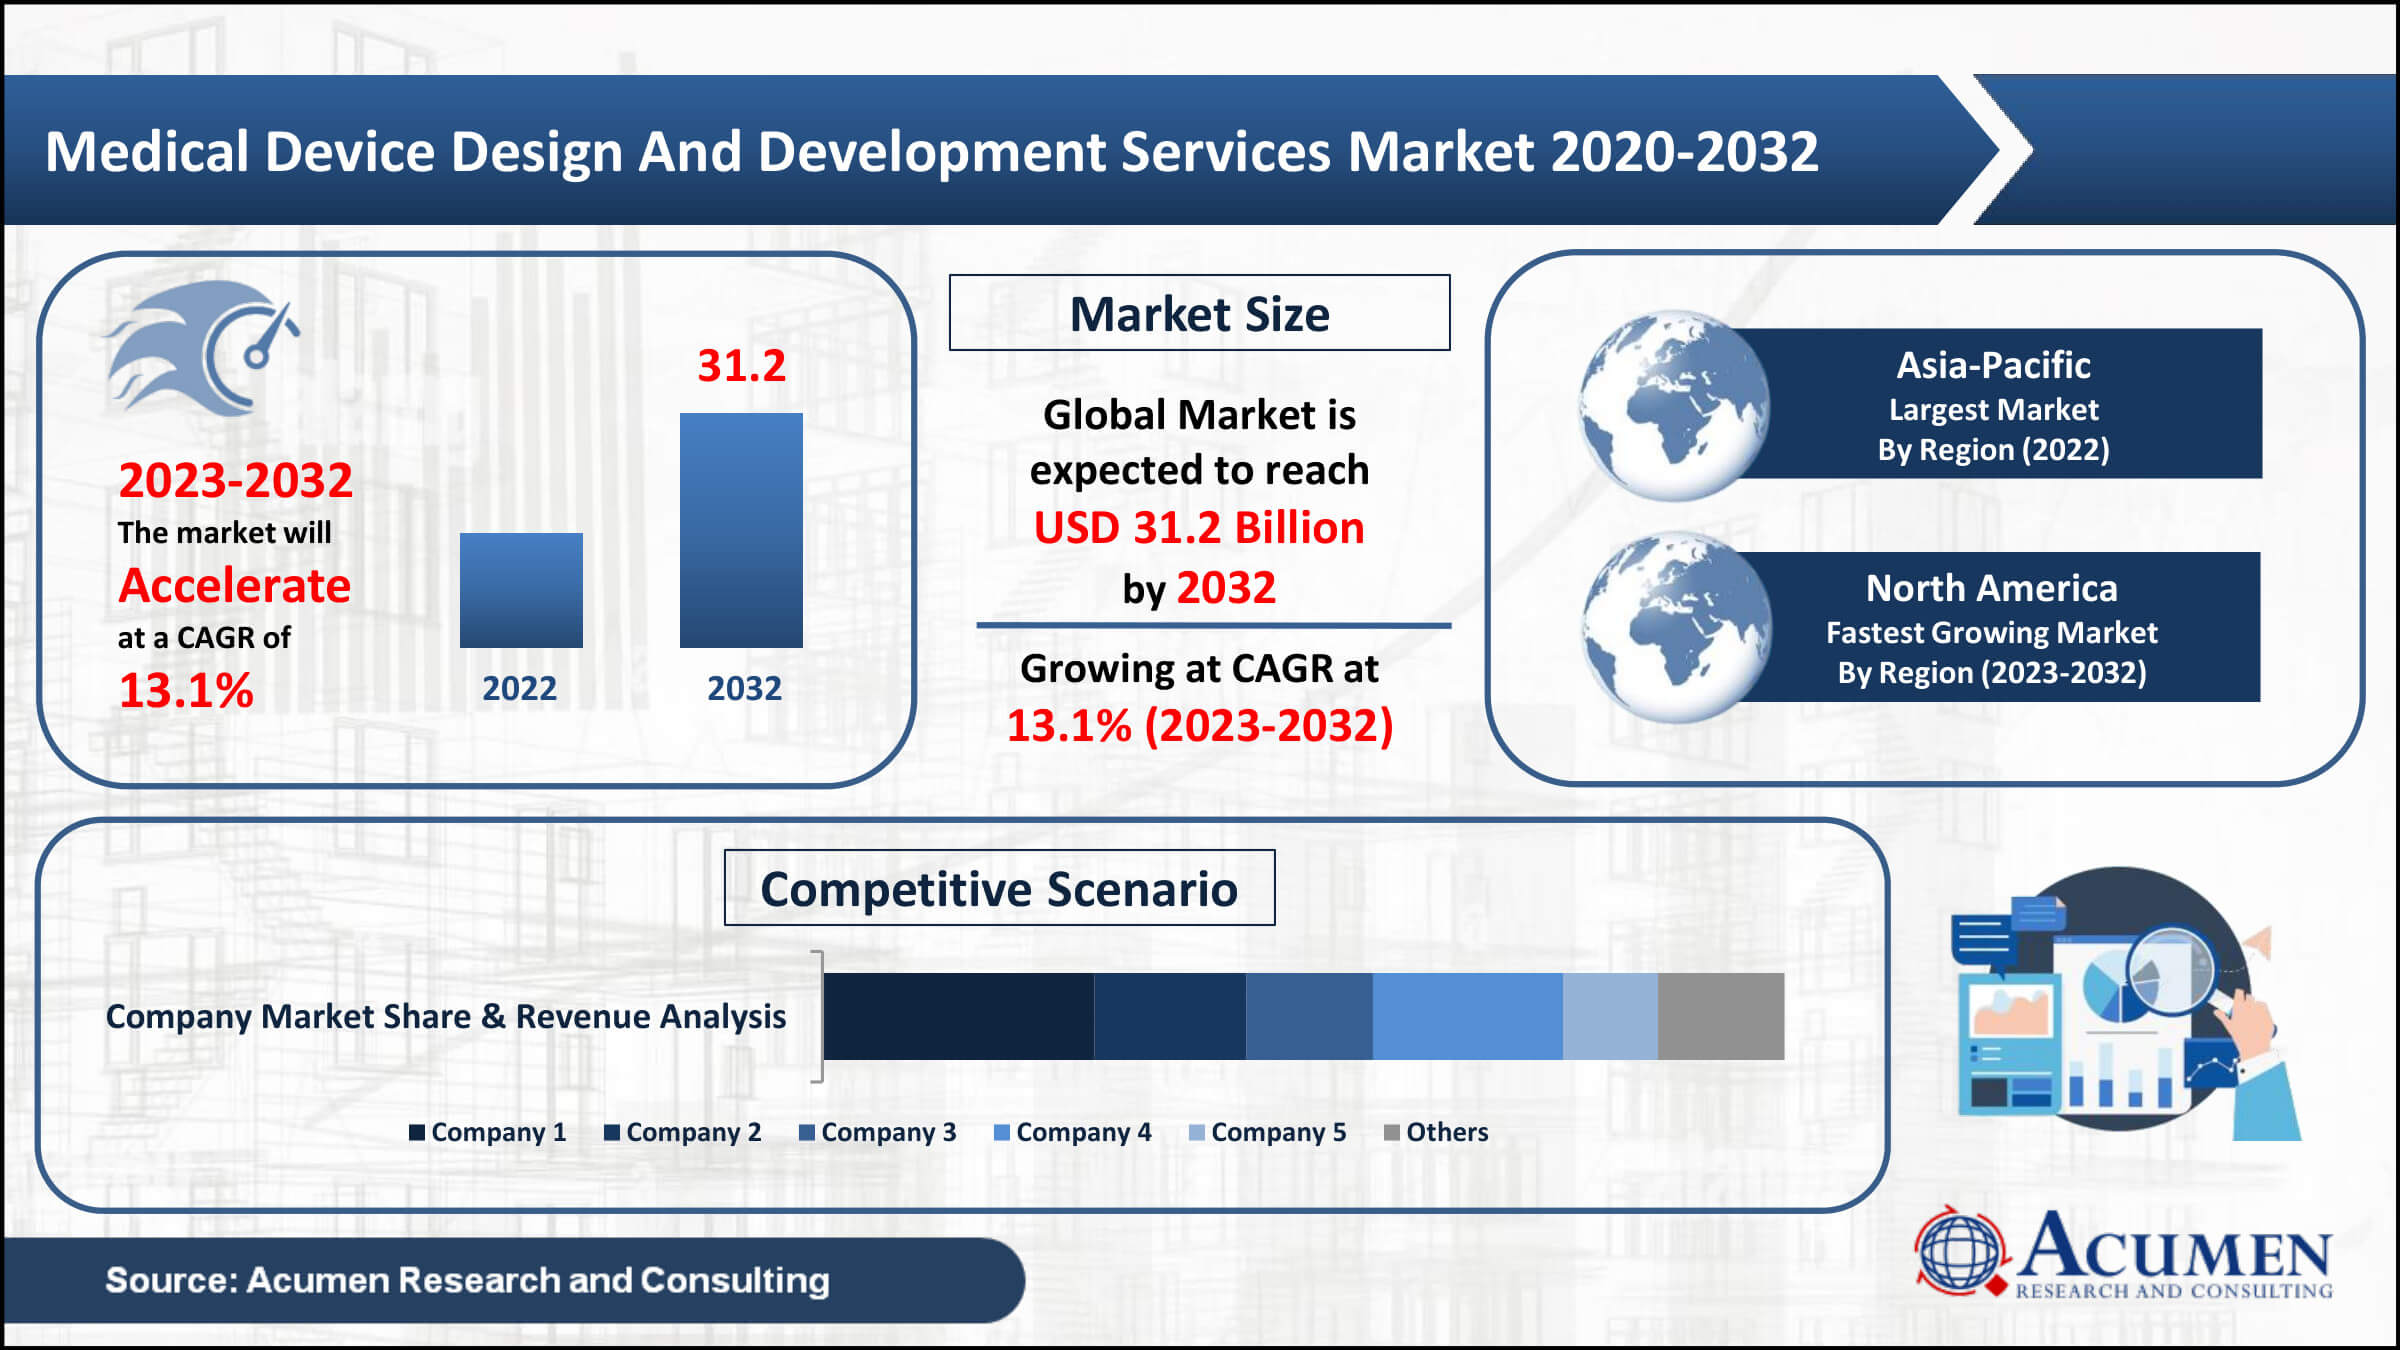 Medical Device Design and Development Services Market Analysis